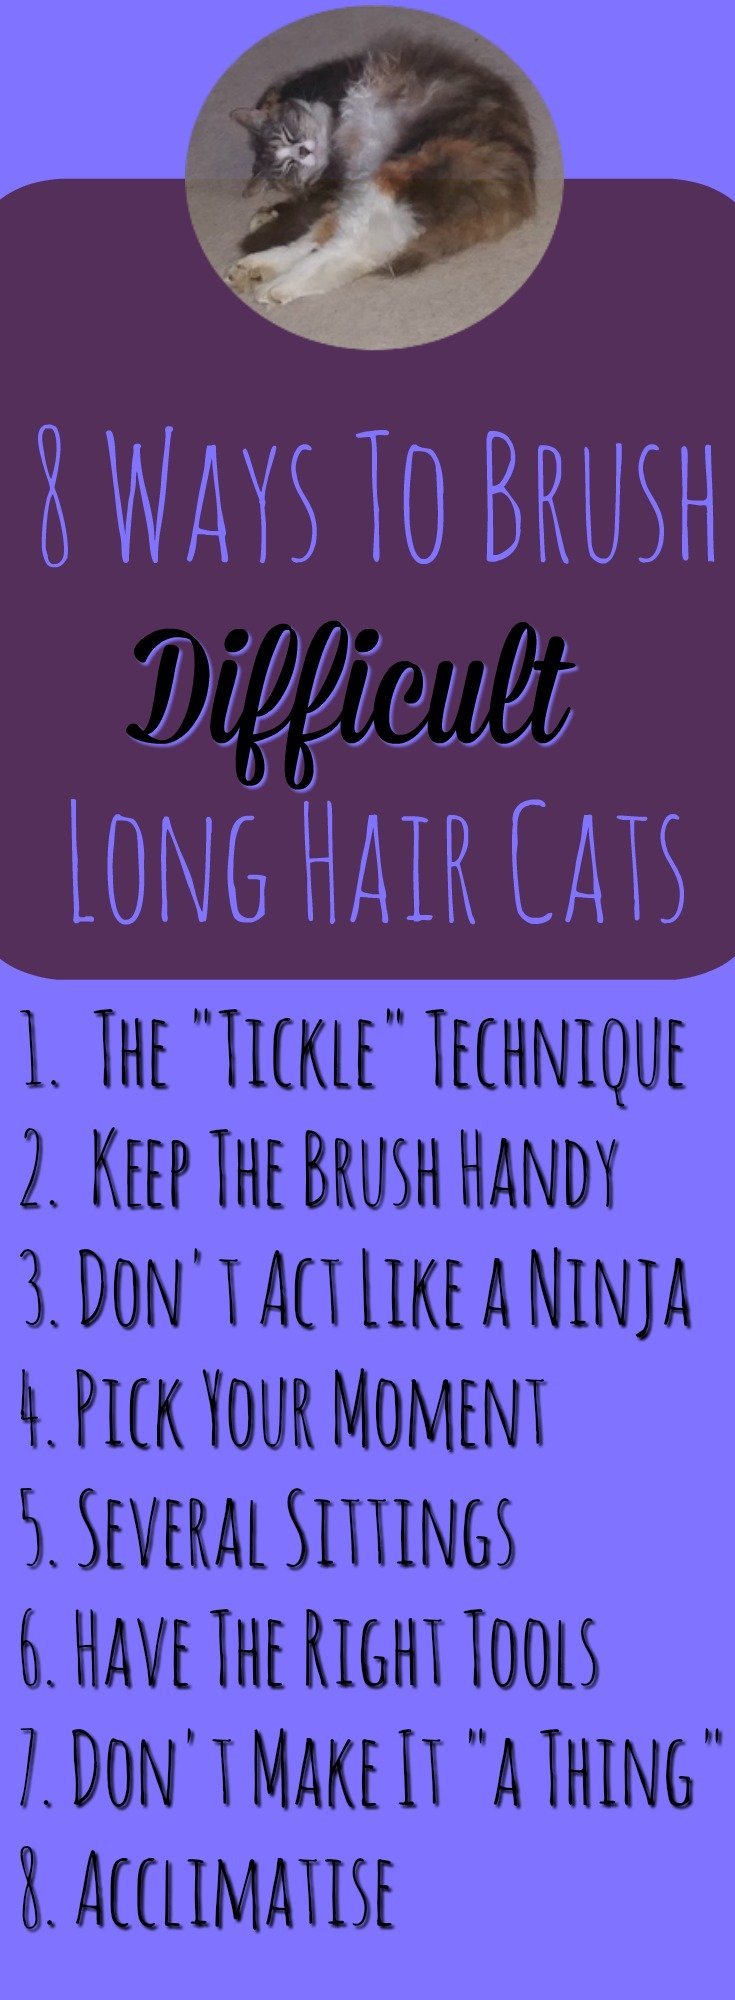 8 ways to brush difficult long hair cats